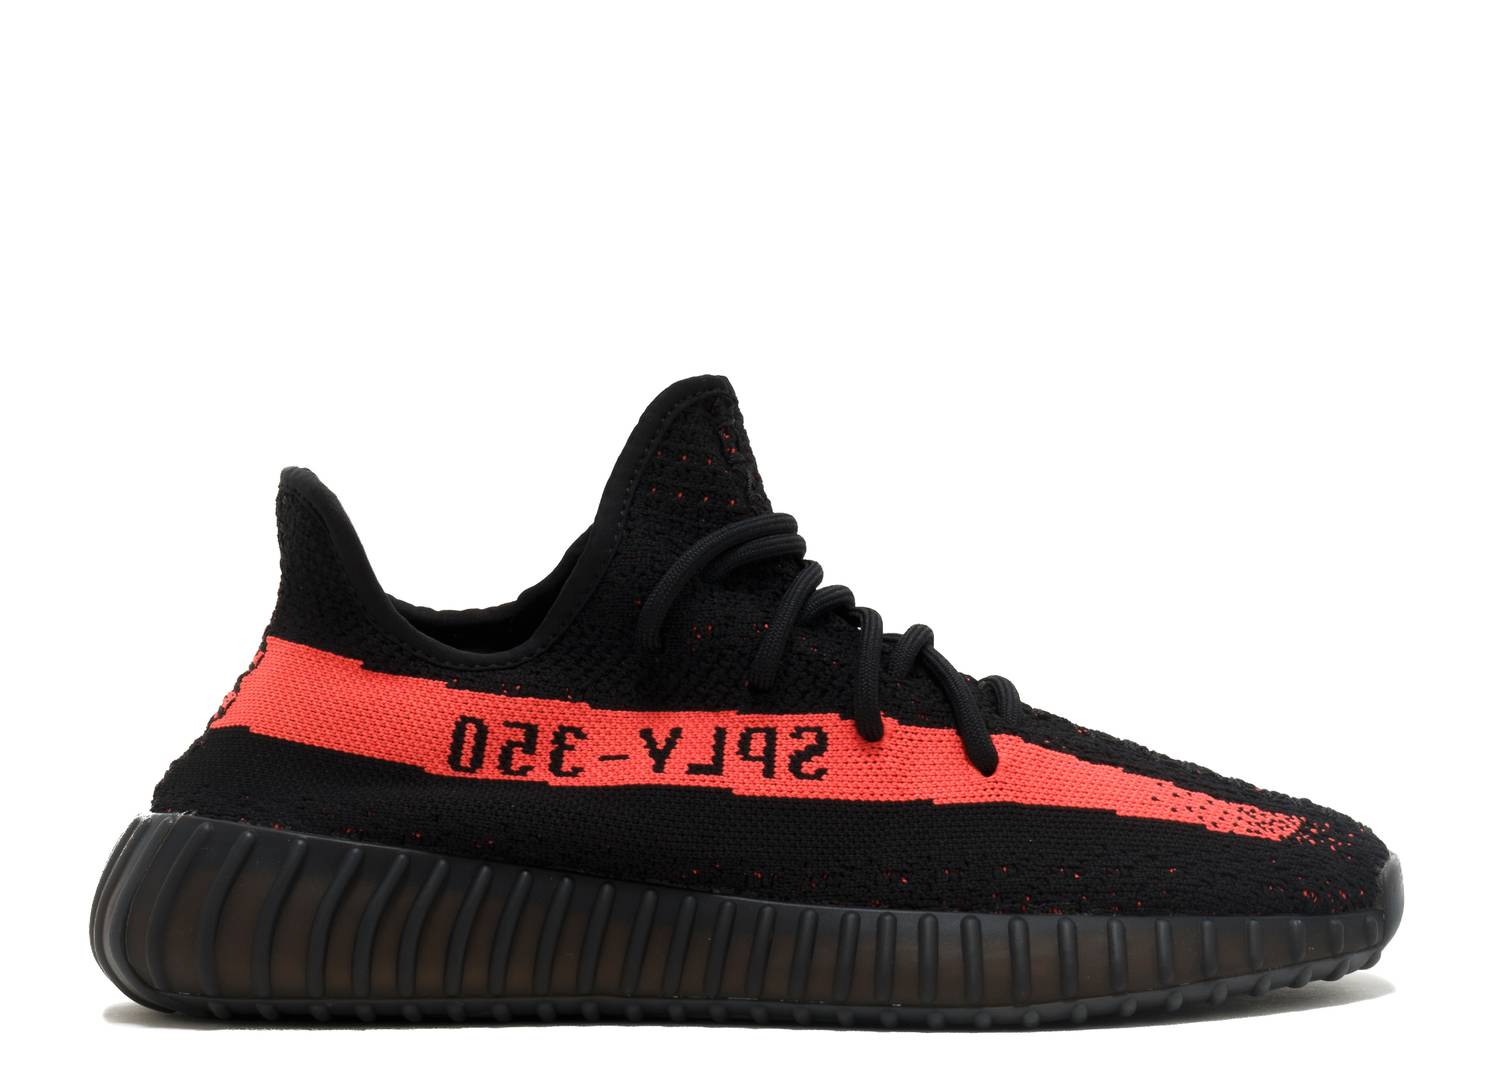 ADIDAS YEEZY BOOST 350 V2 “CORE RED”